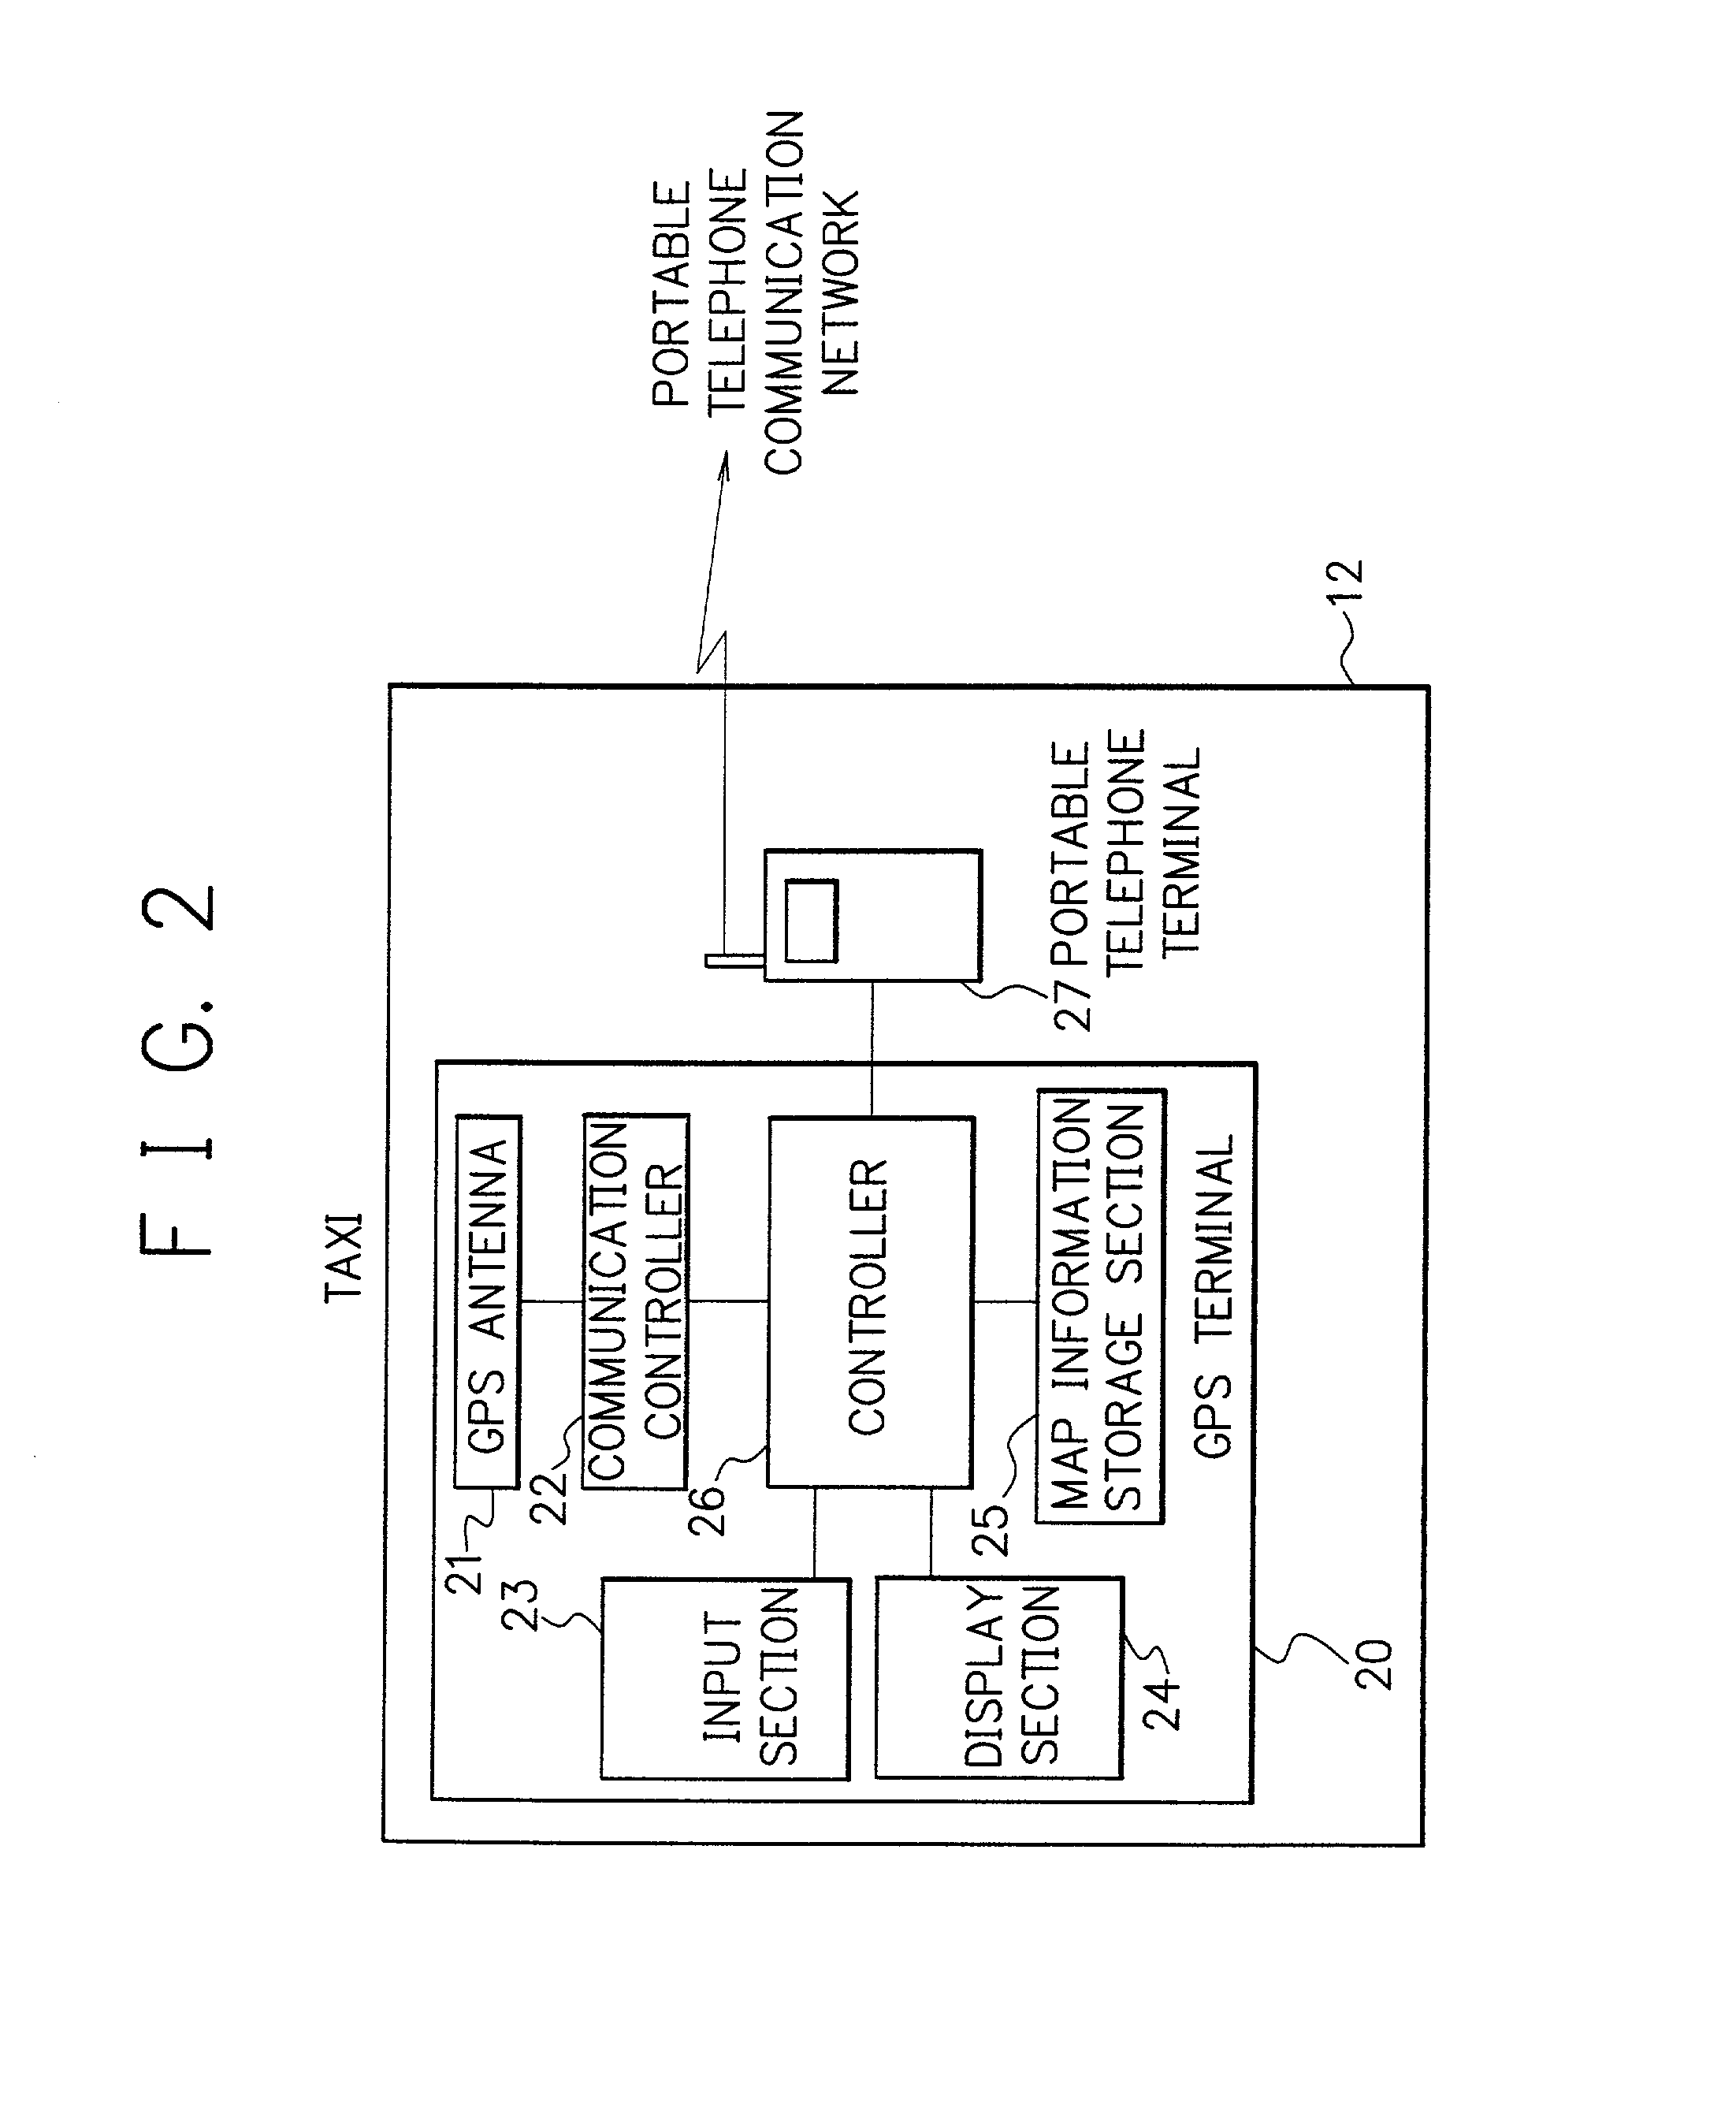 System and method for providing a transporation service